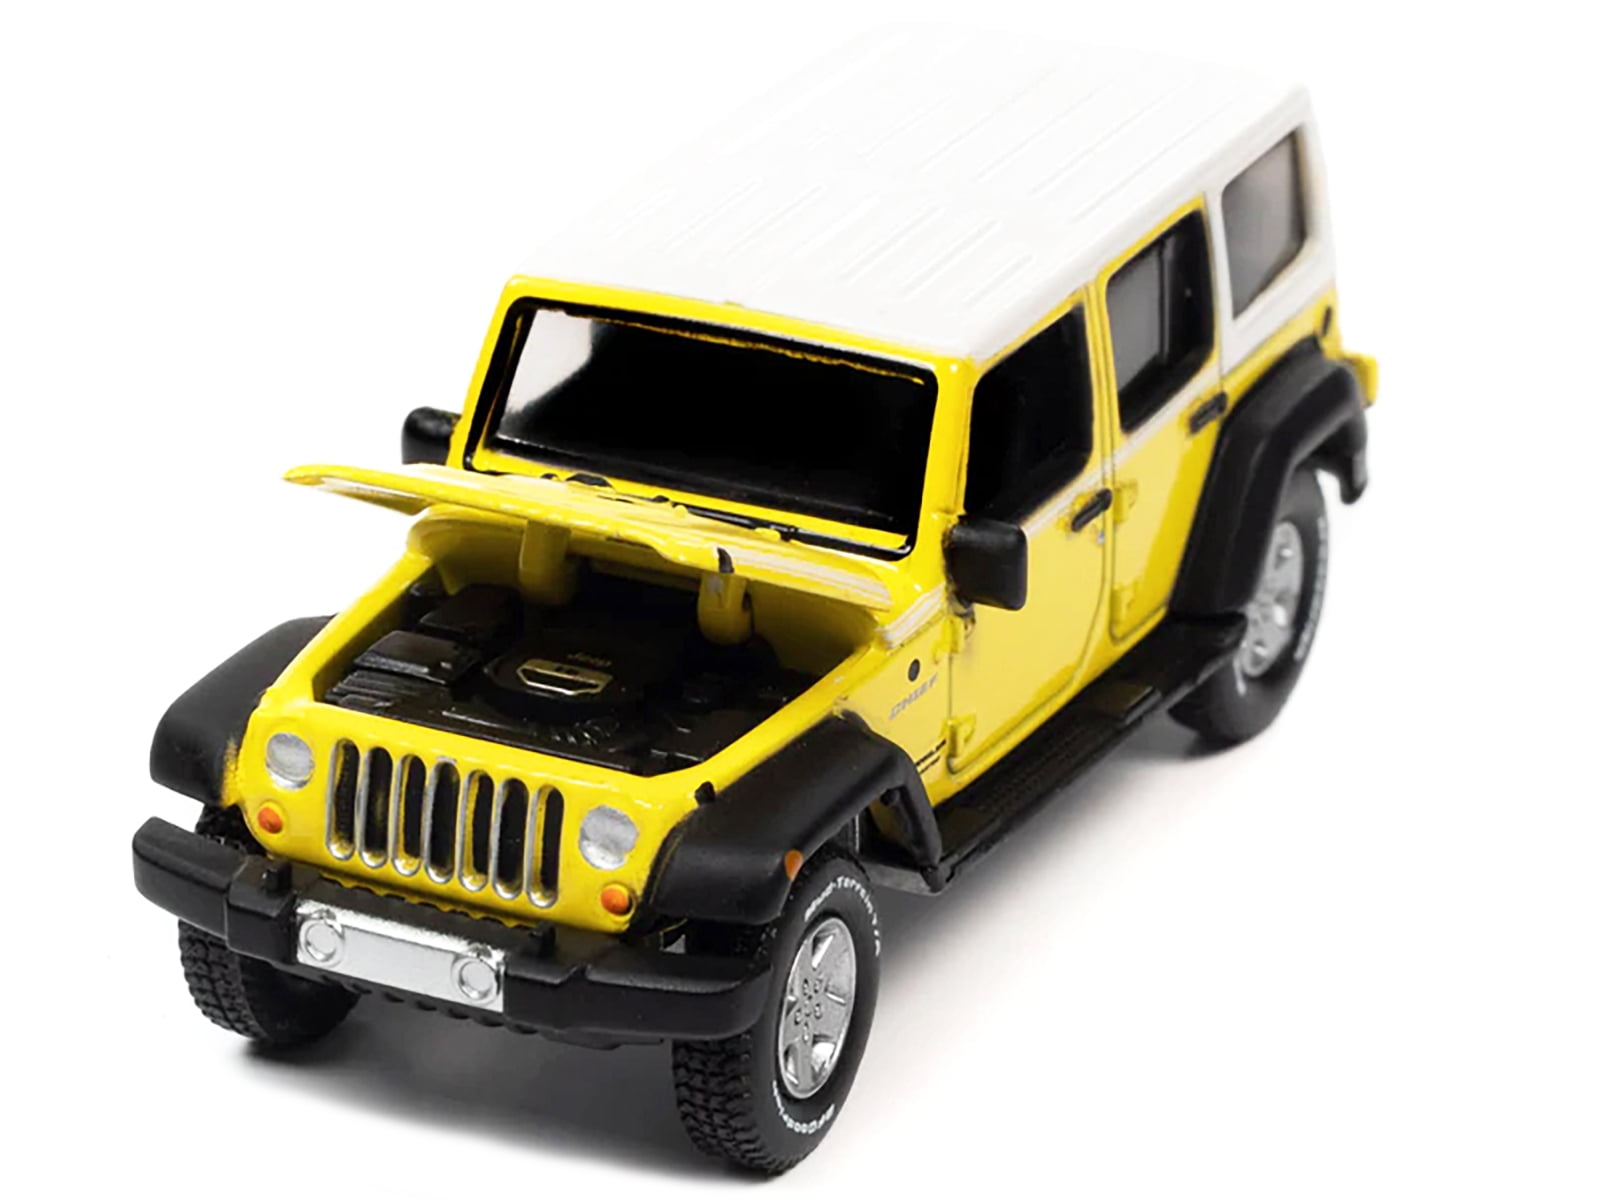 2017 Jeep JK Wrangler Chief Edition Acid Yellow with White Top 